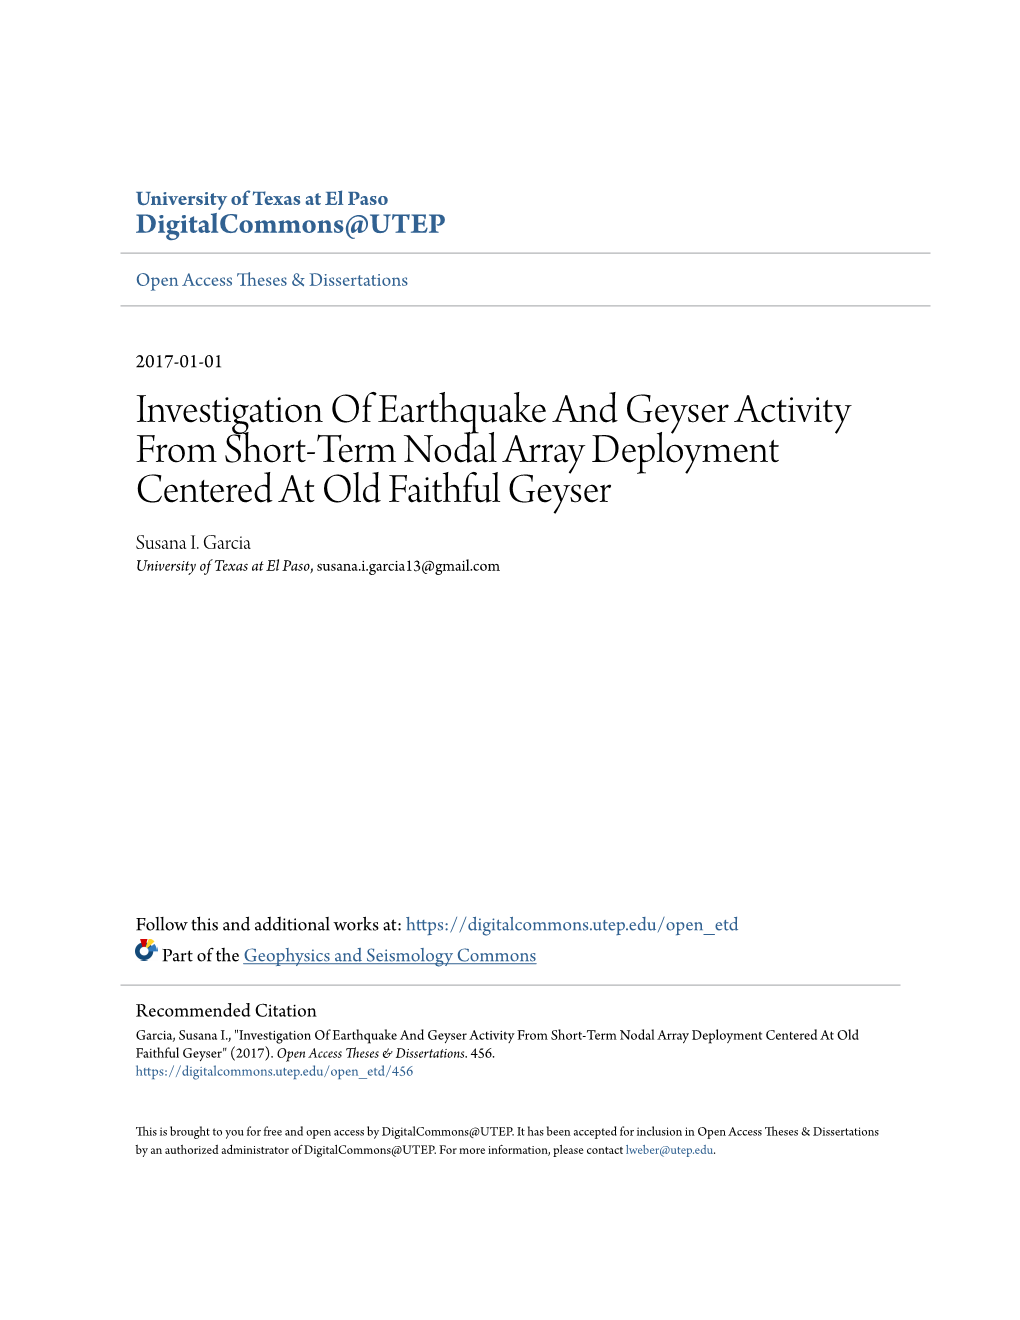 Investigation of Earthquake and Geyser Activity from Short-Term Nodal Array Deployment Centered at Old Faithful Geyser Susana I